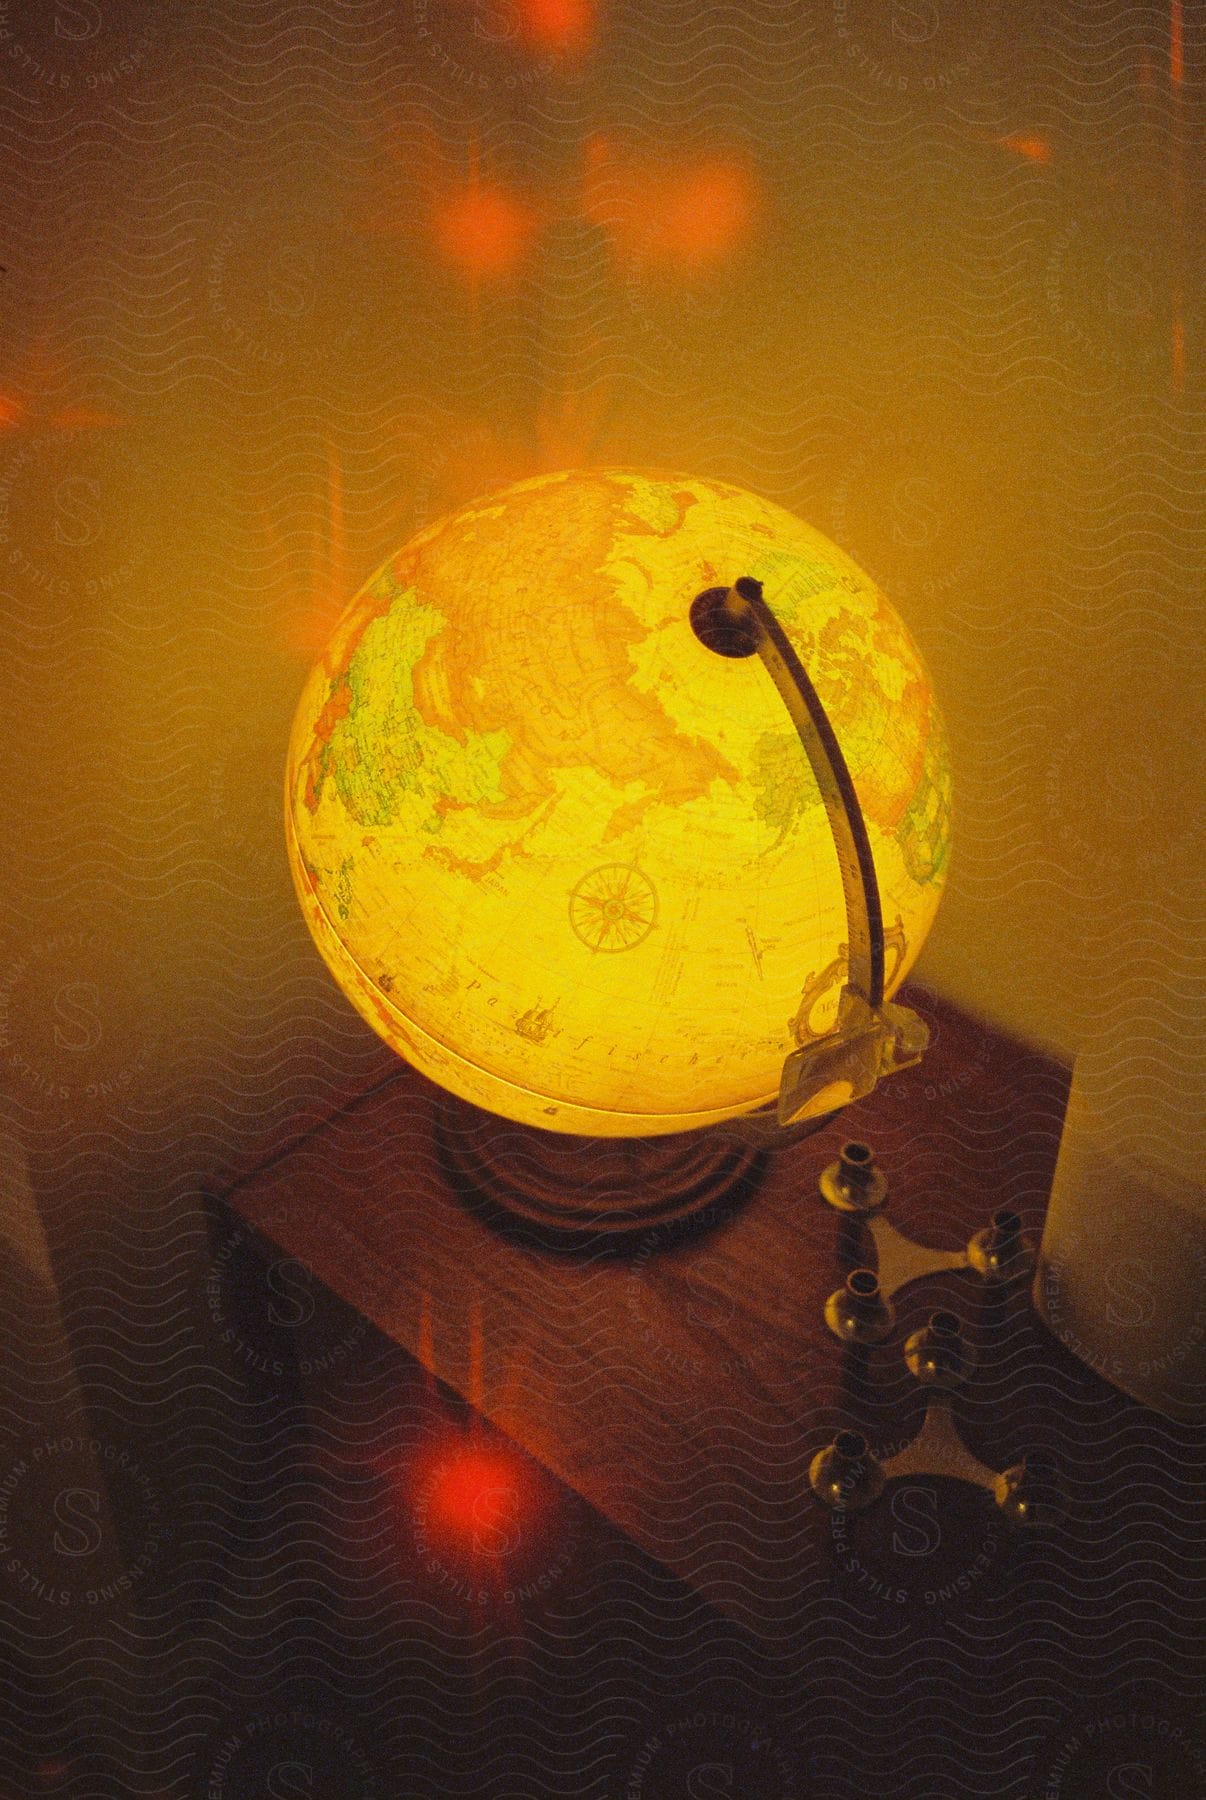 A wooden table with an ambercolored sphere